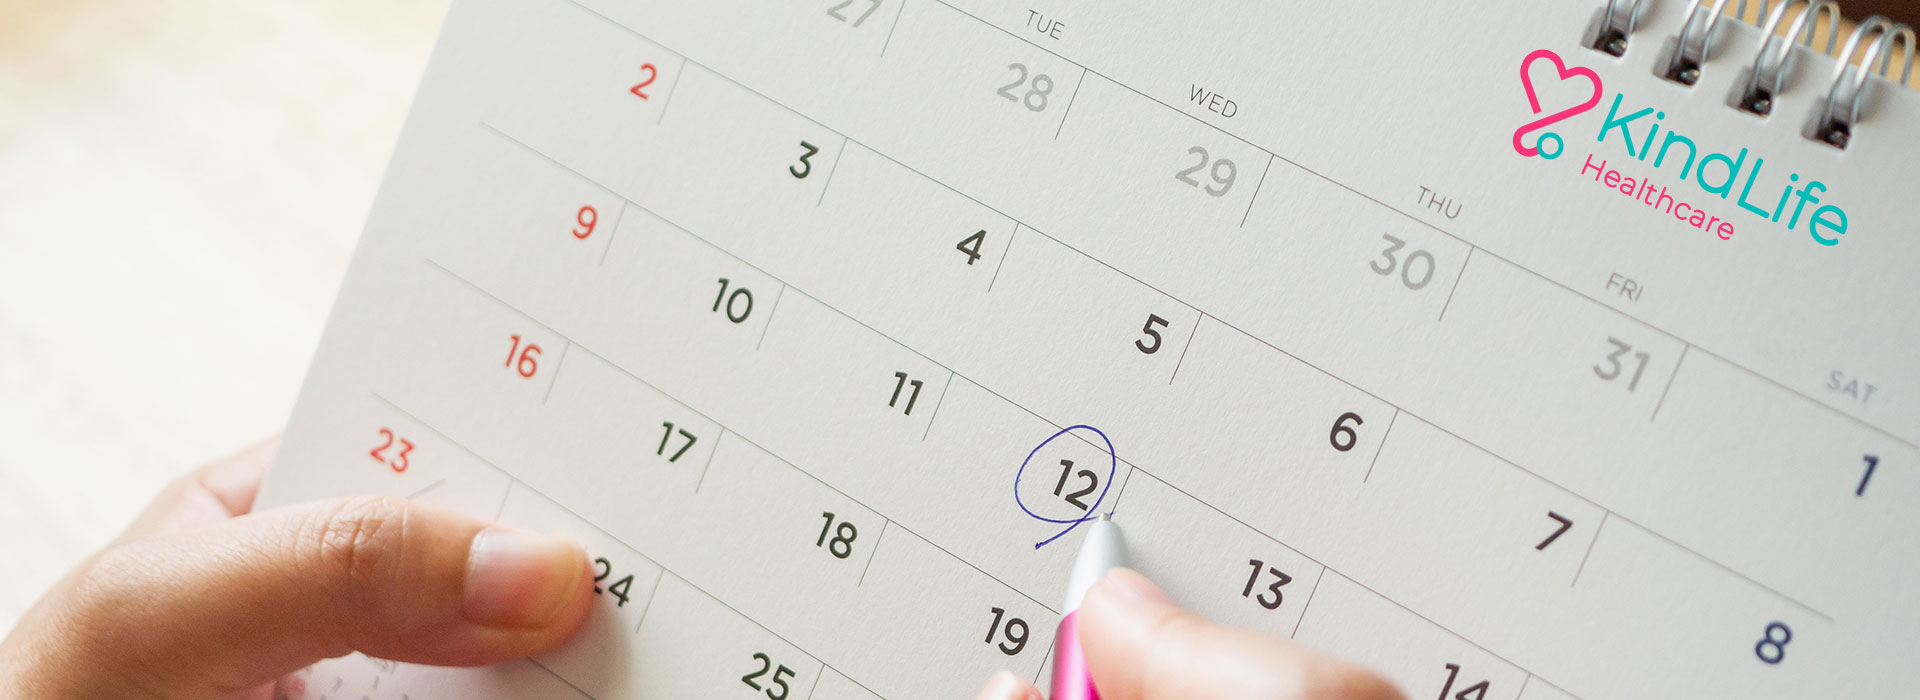 Woman circling date on marketing event calendar as opportunity for promotional marketing products